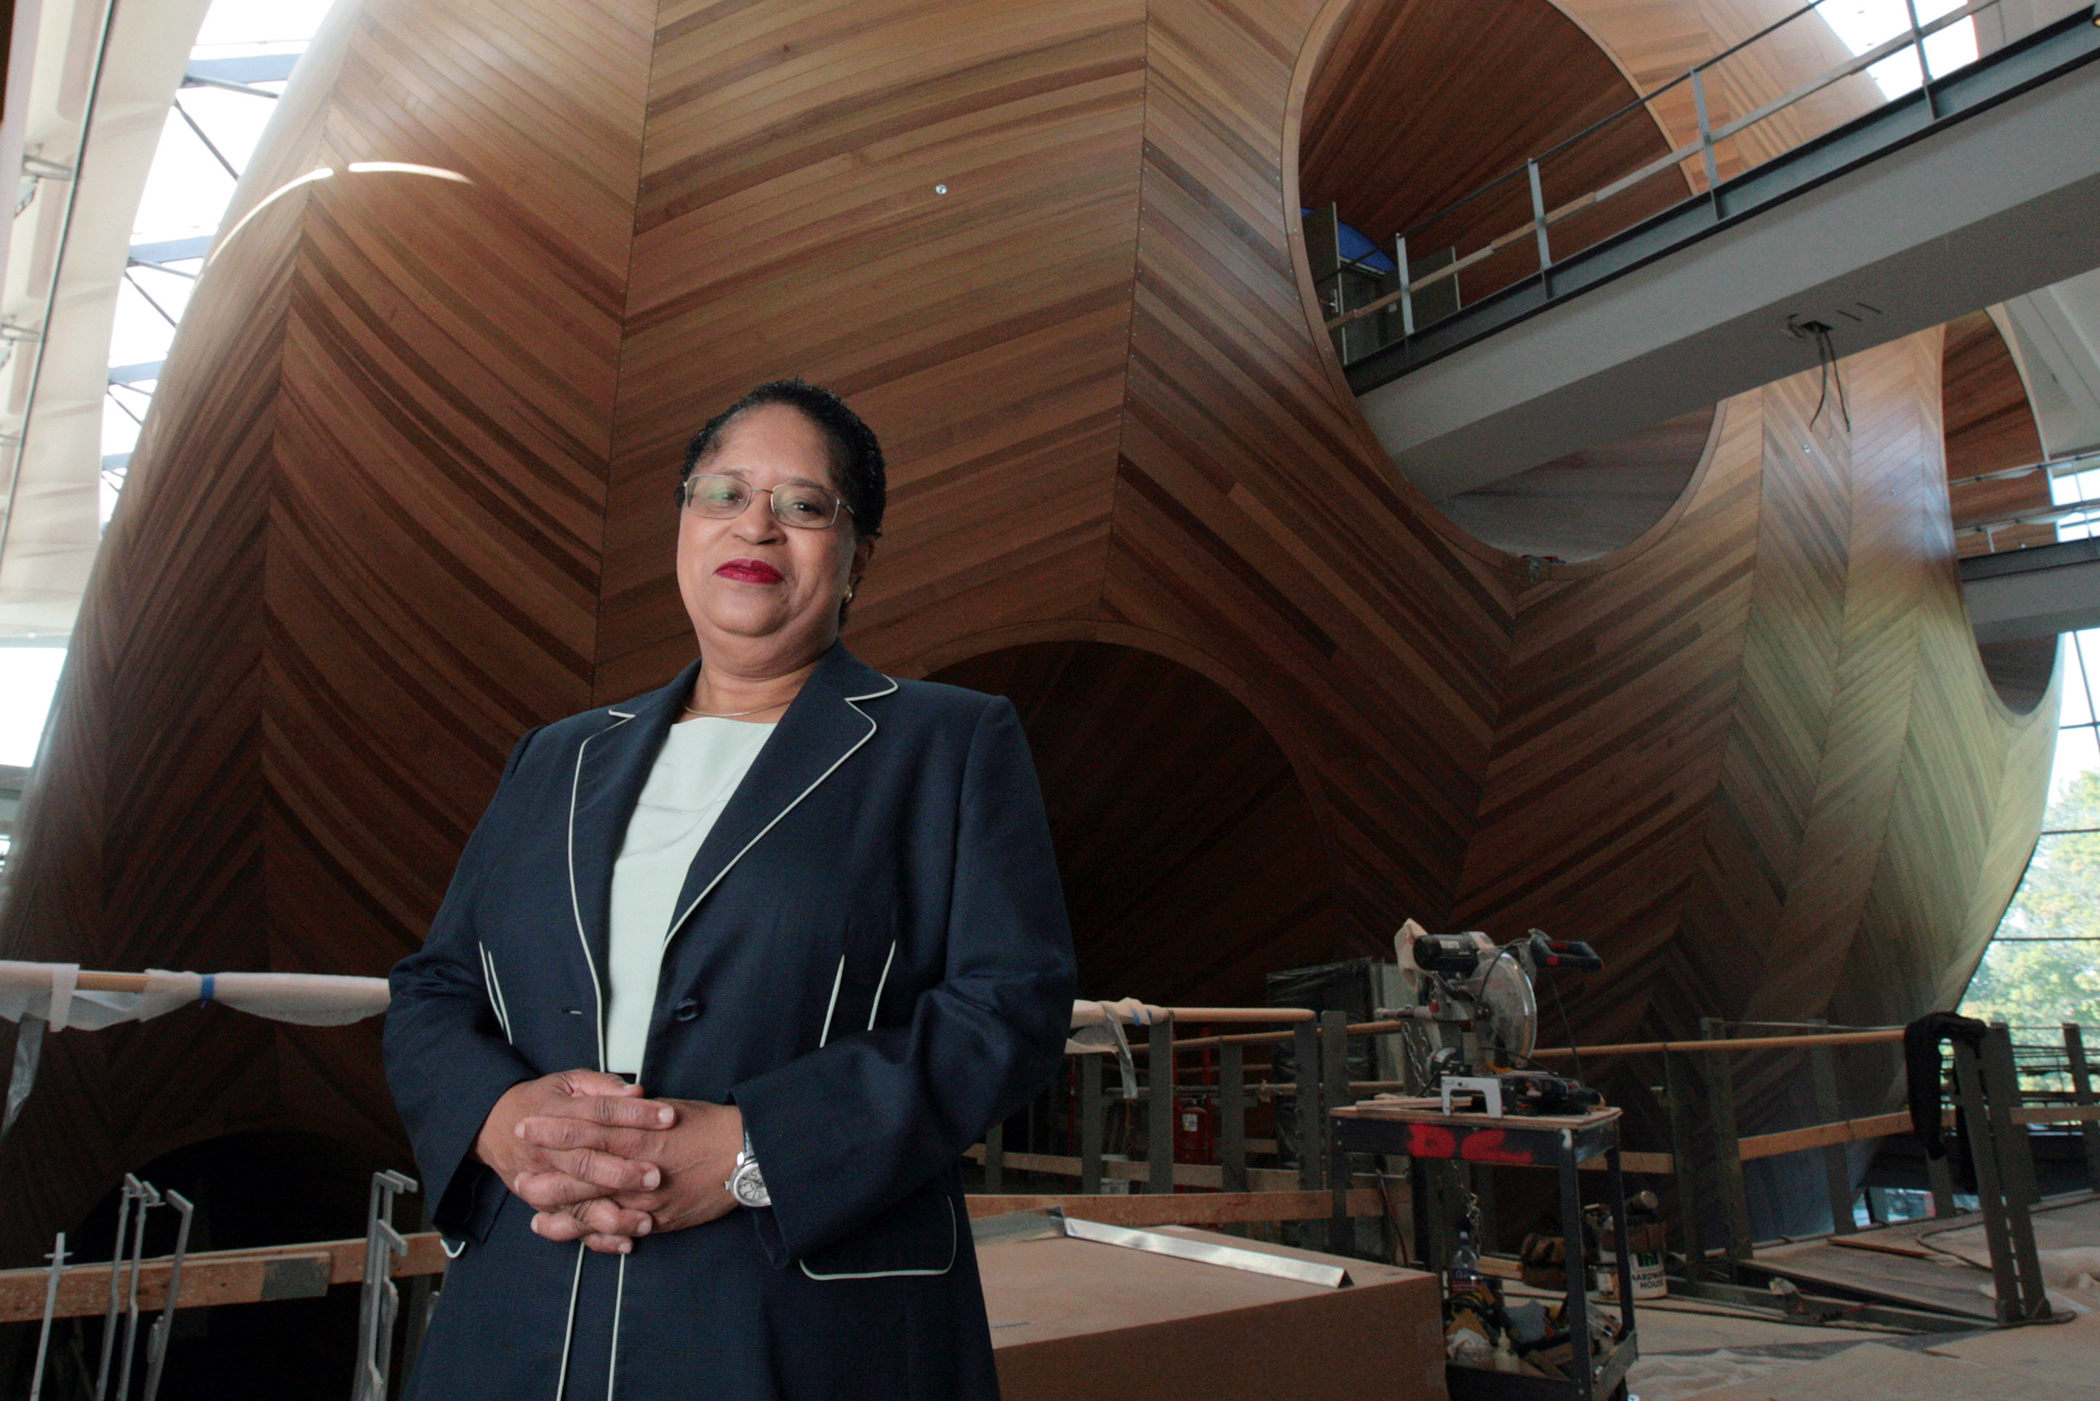 Shirley Ann Jackson, a physicist and the president of Rensselaer Polytechnic Institute, in front of the dome of the college's new theater in Troy, N.Y., in a Sept. 10, 2008 photo.